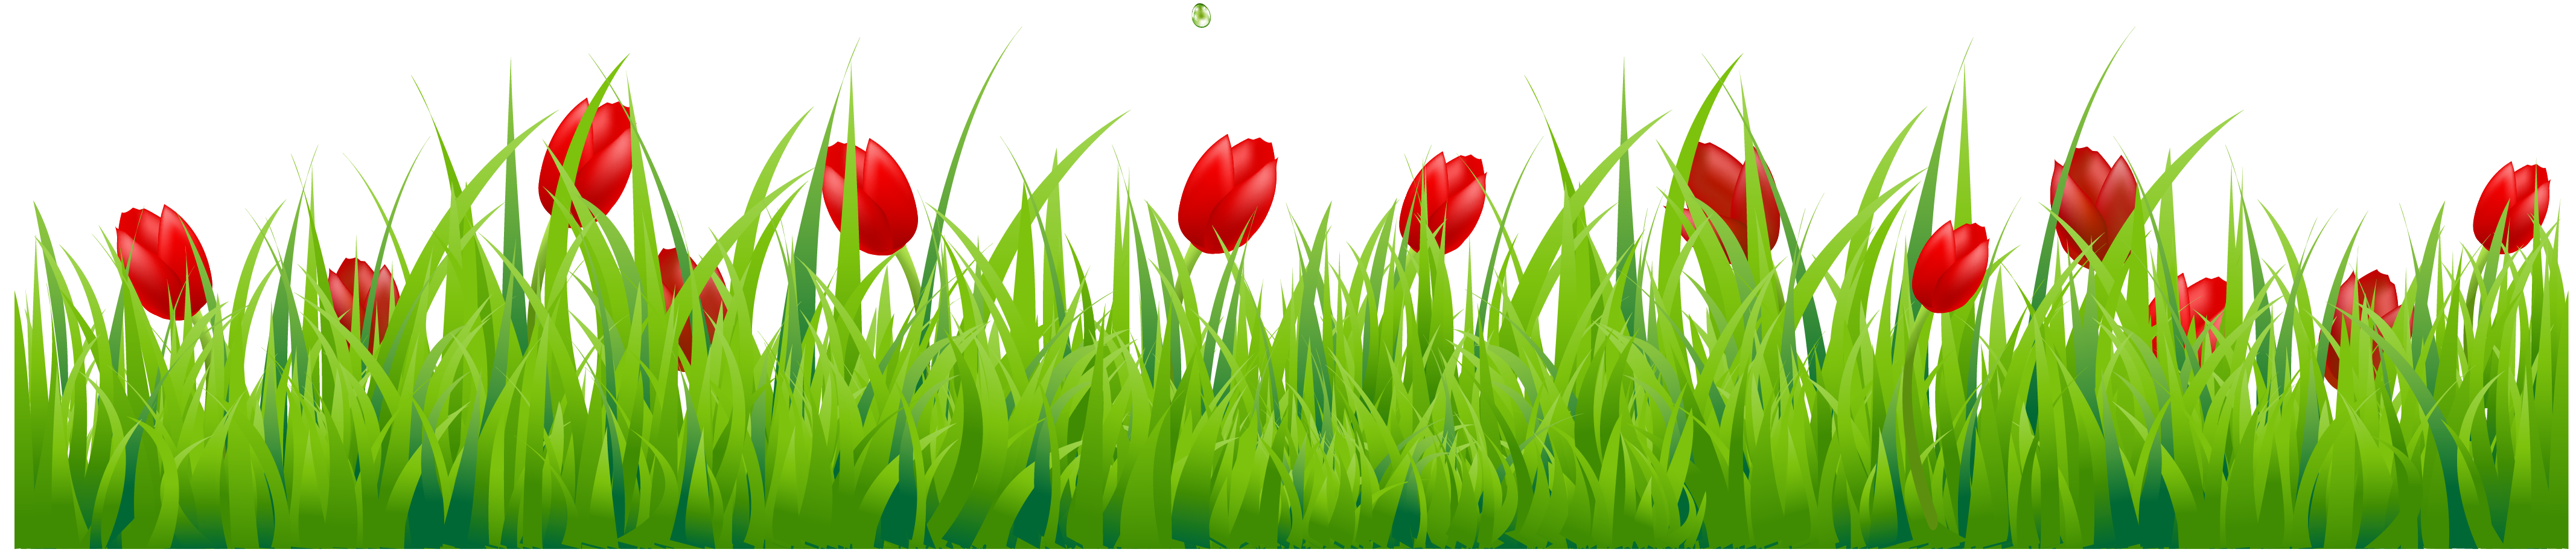 Green grass clipart free stock photo public domain pictures image